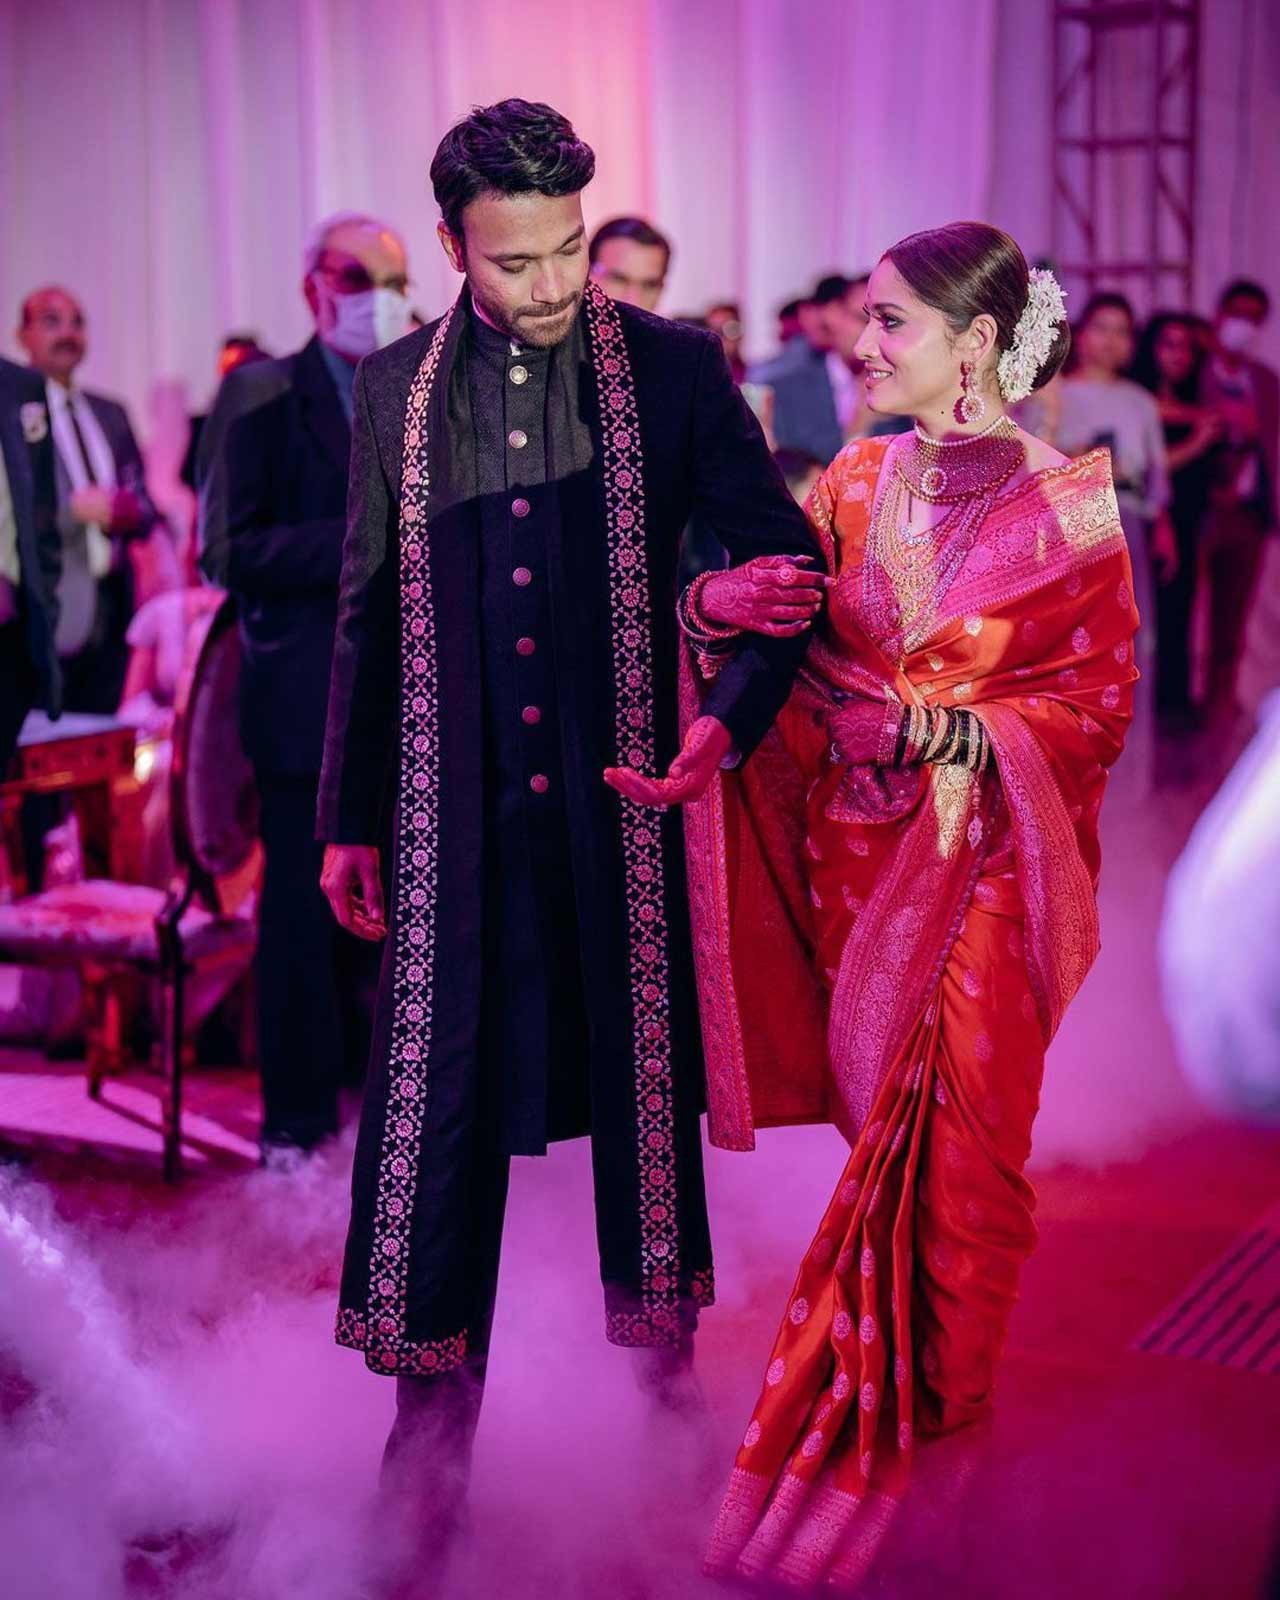 Ankita Lokhande and Vicky Jain shared pictures from their reception ceremony, and they look every bit royal! Dressed in a red Sabyasachi saree, Ankita looked ethereal in her ensemble.